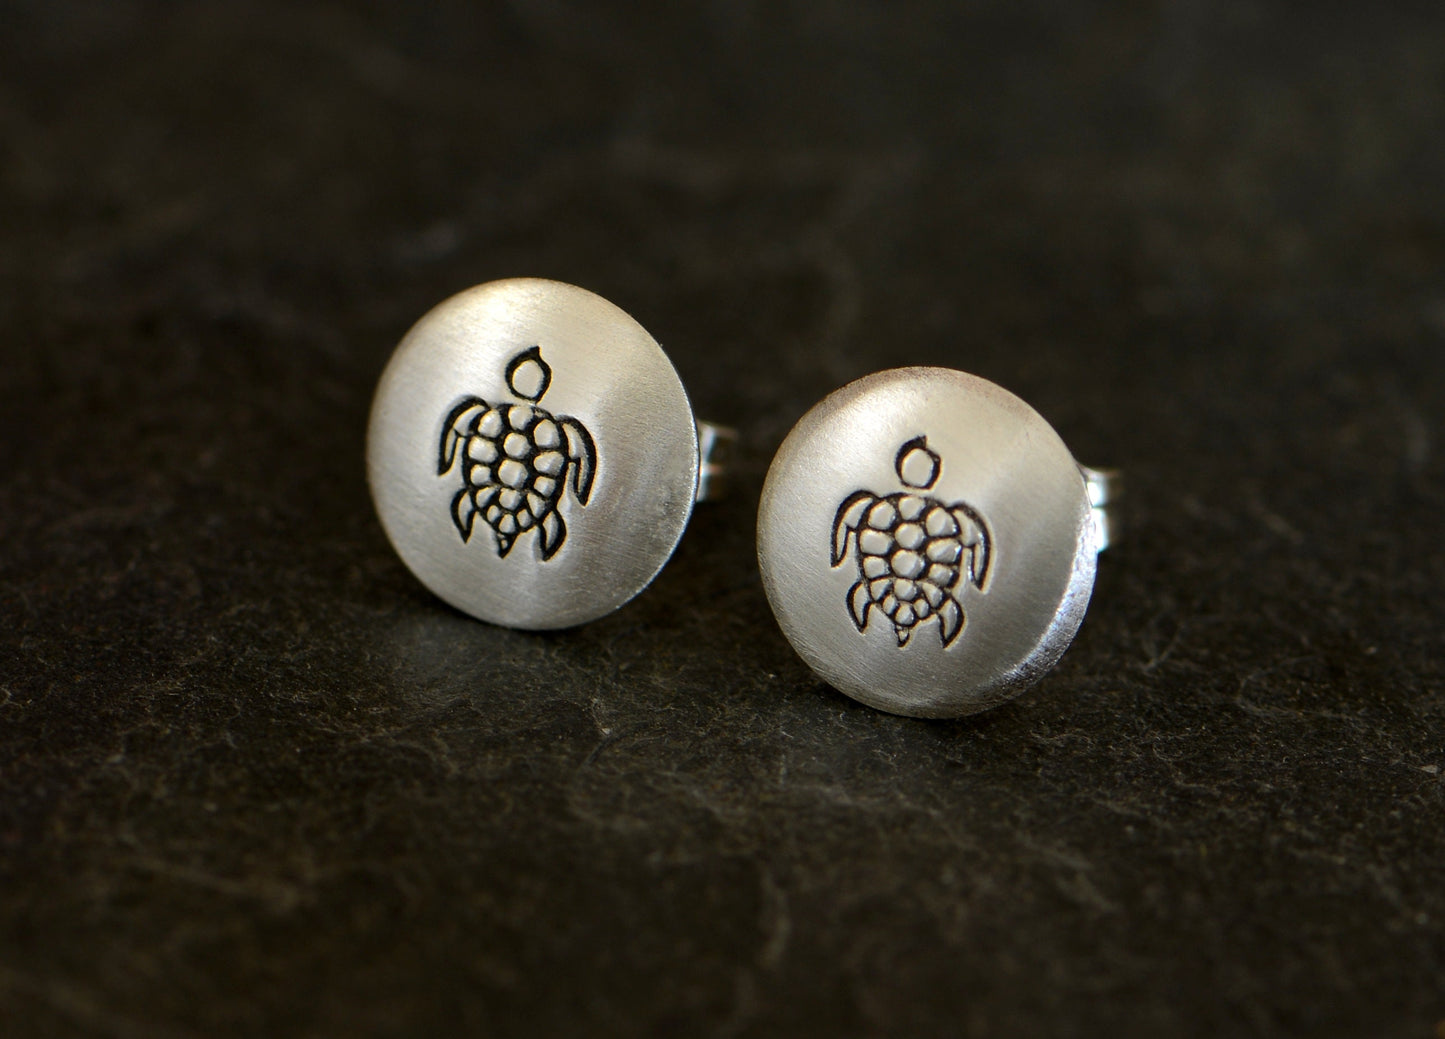 Button style earrings with sea turtle designs in sterling silver